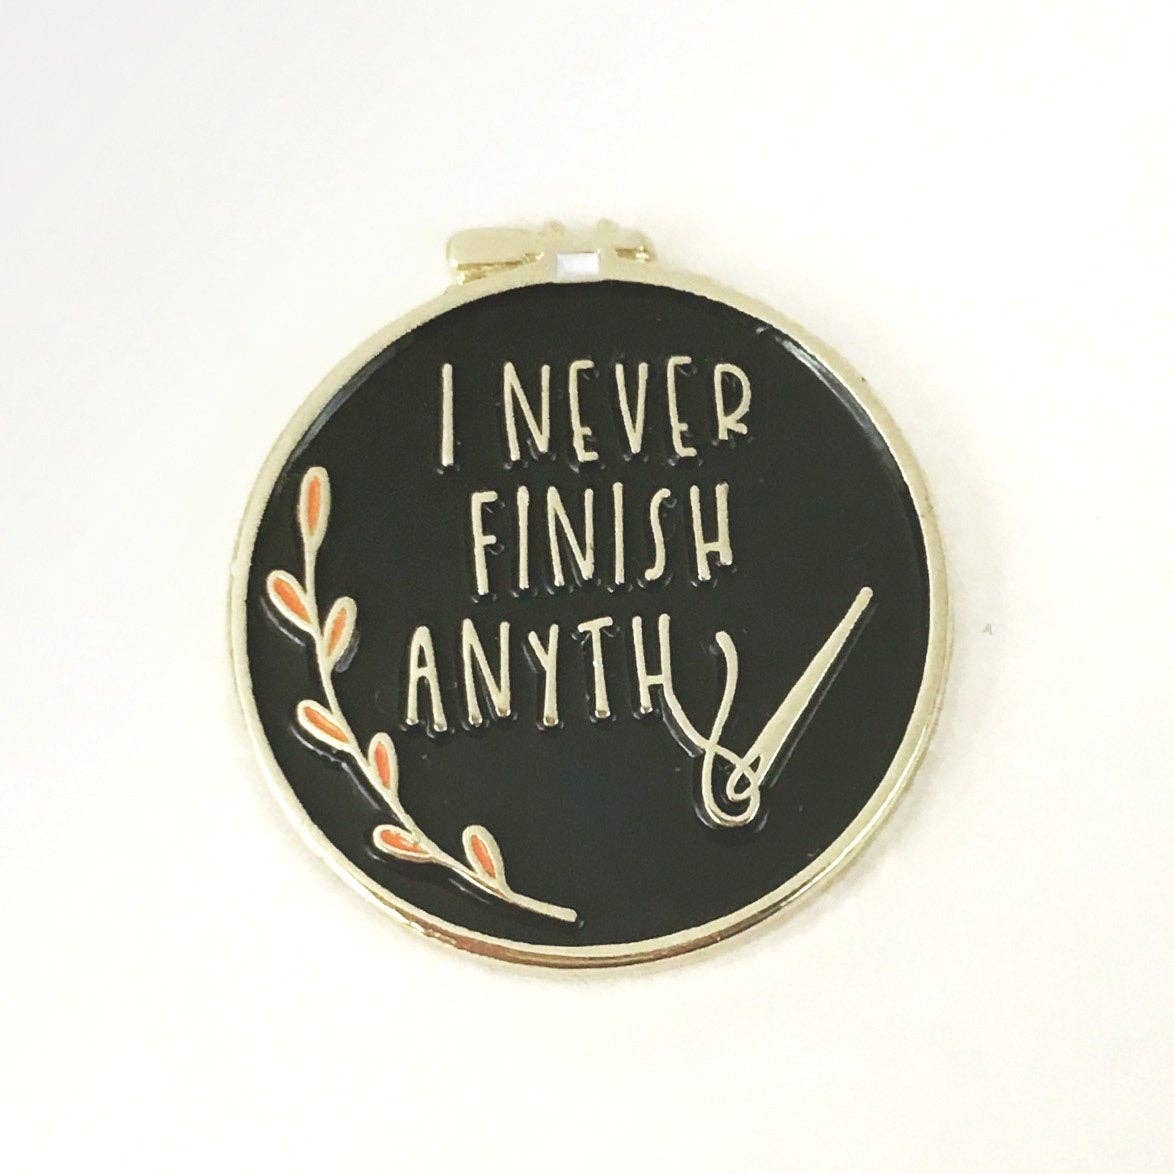 Snarky Crafter Designs - Black "I Never Finish Anything" Needle Minders